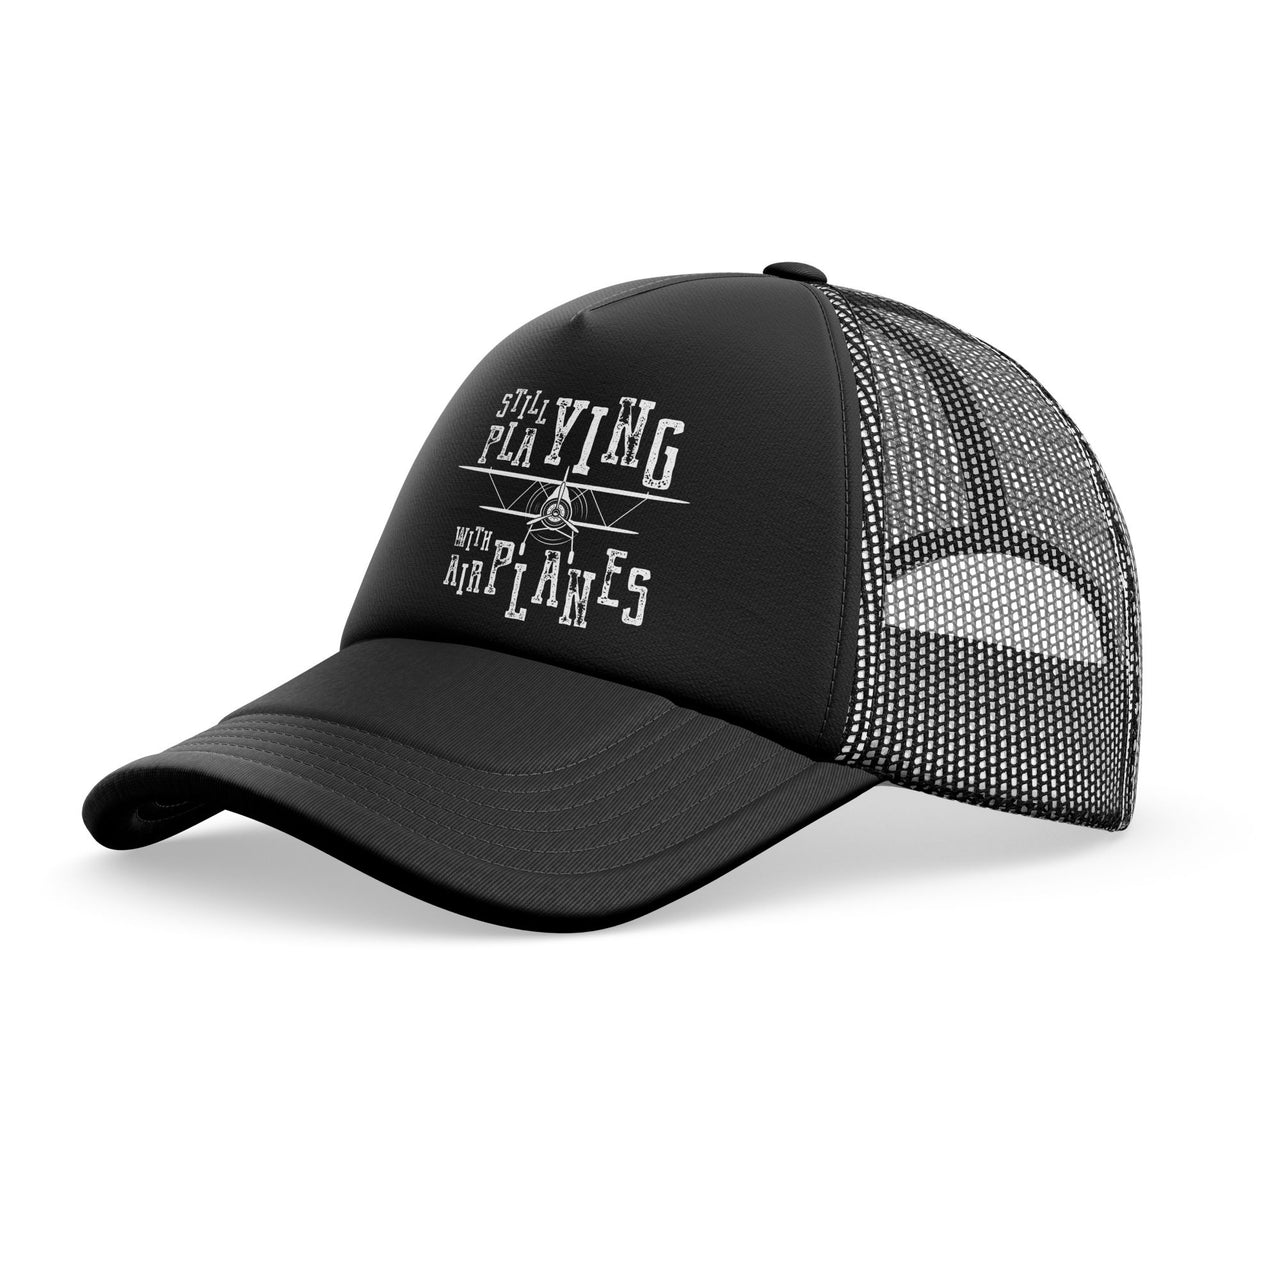 Still Playing With Airplanes Designed Trucker Caps & Hats